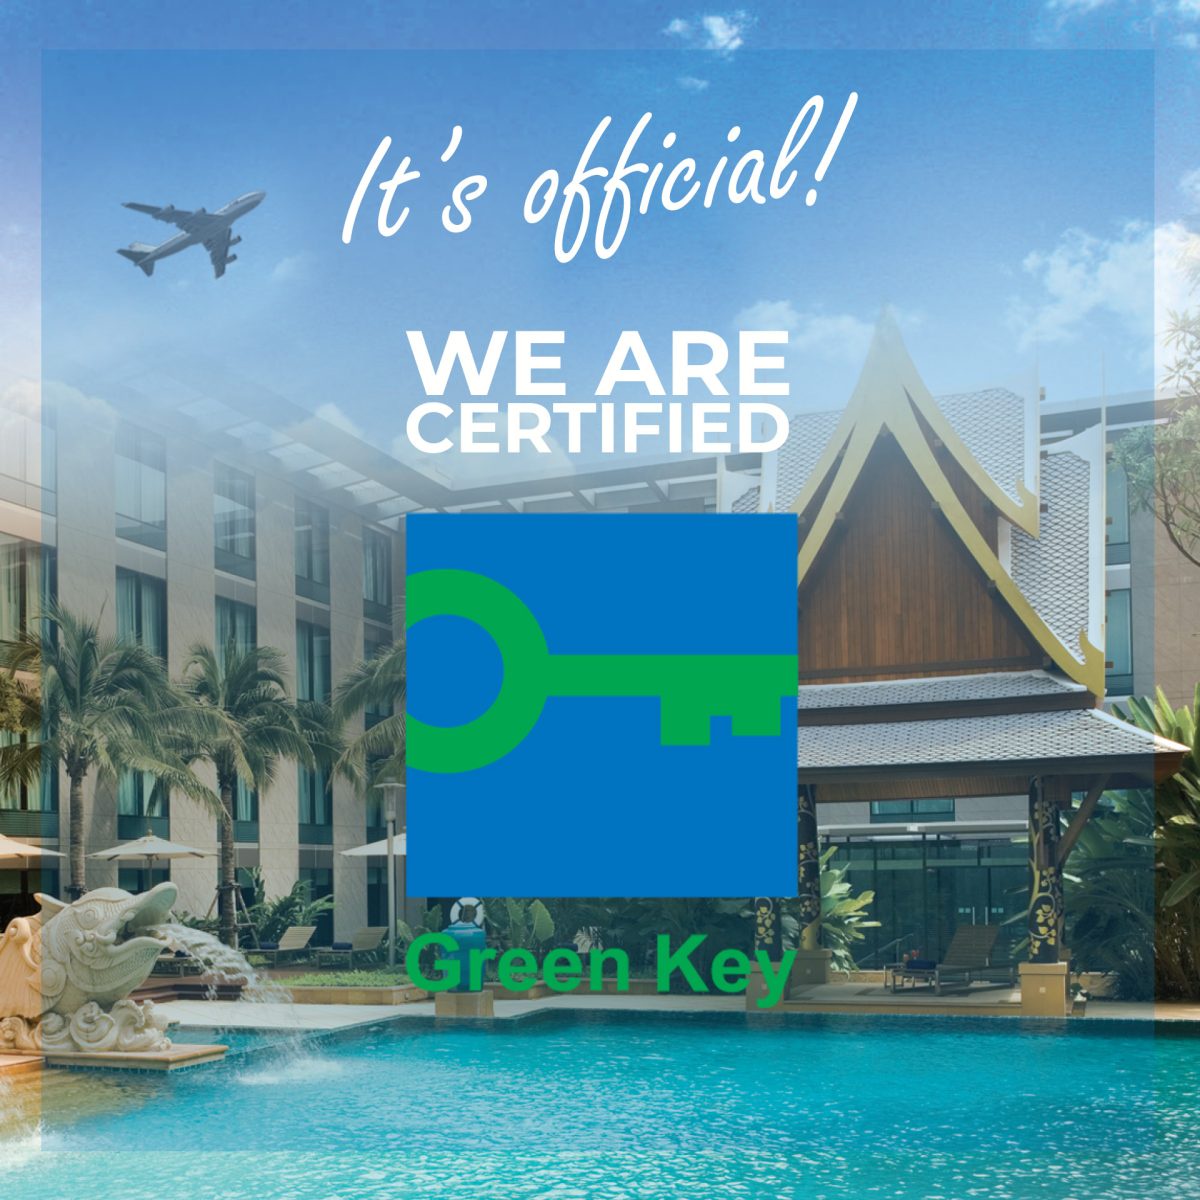 Novotel Bangkok Suvarnabhumi Airport Hotel proudly stands as the FIRST Airport Hotel with Green Key Certificate in South East Asia